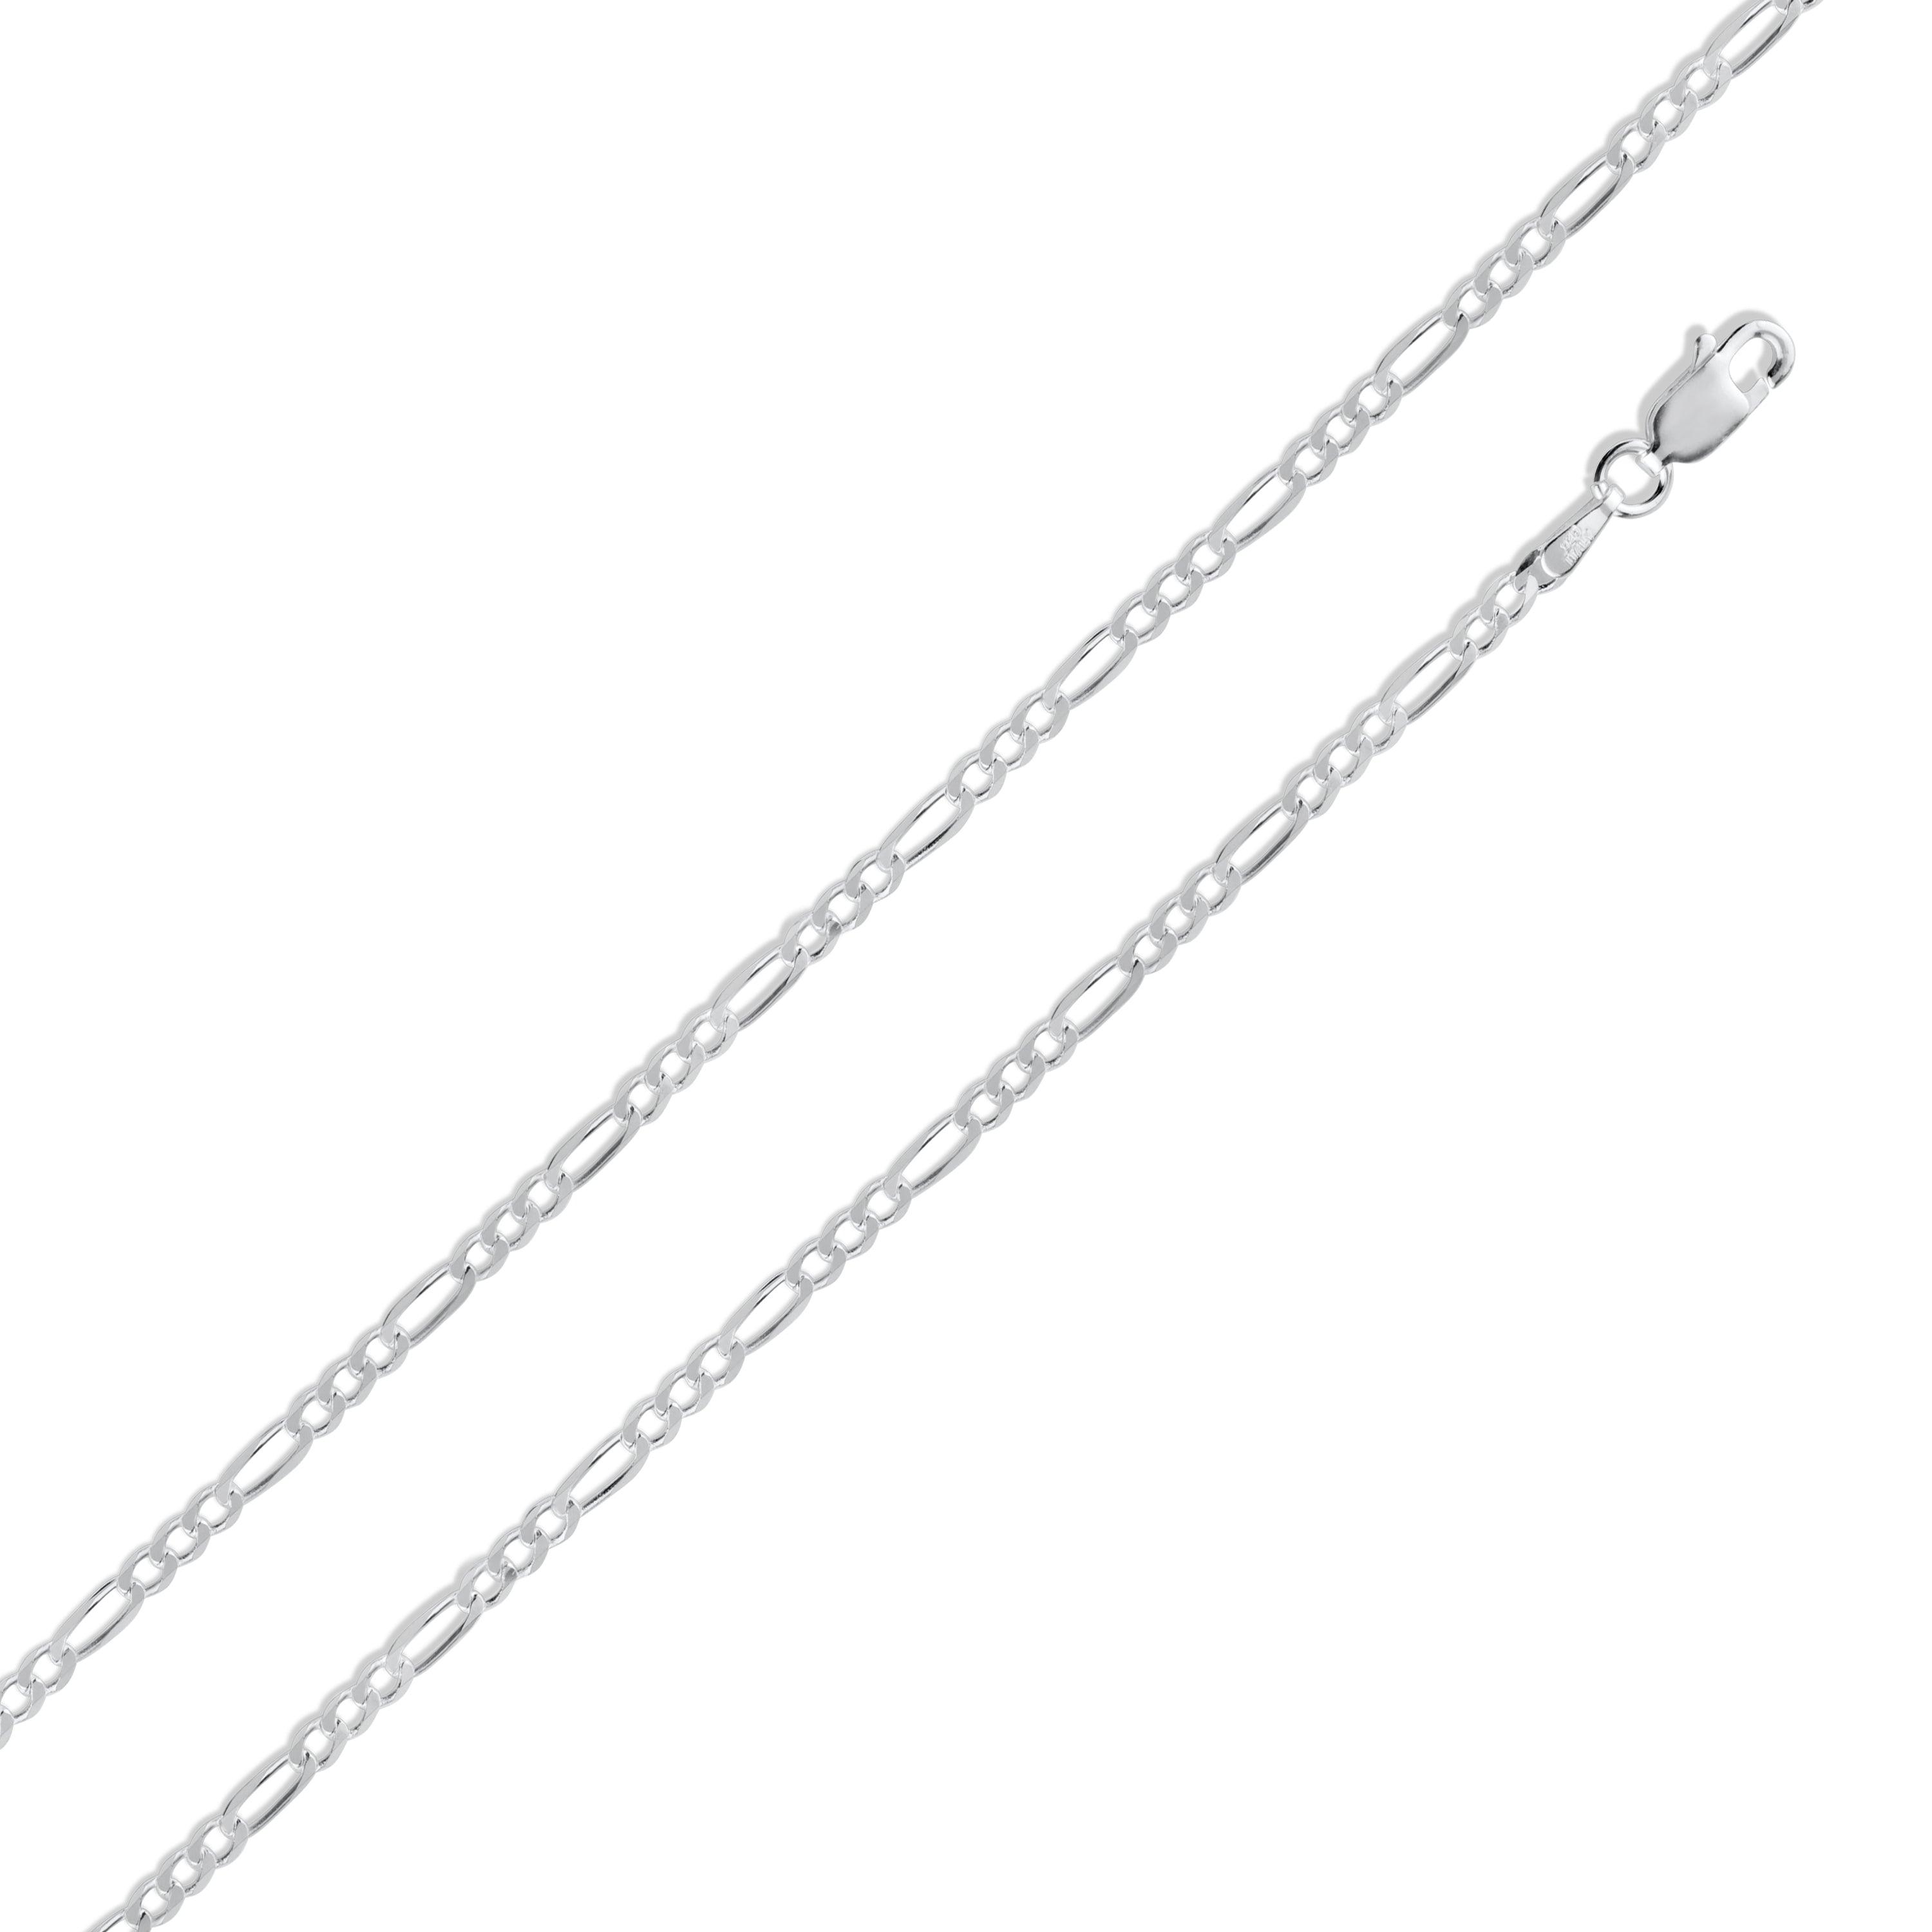 Silver Necklace Chains Bulk Jewelry Making Supplies Set Assorted